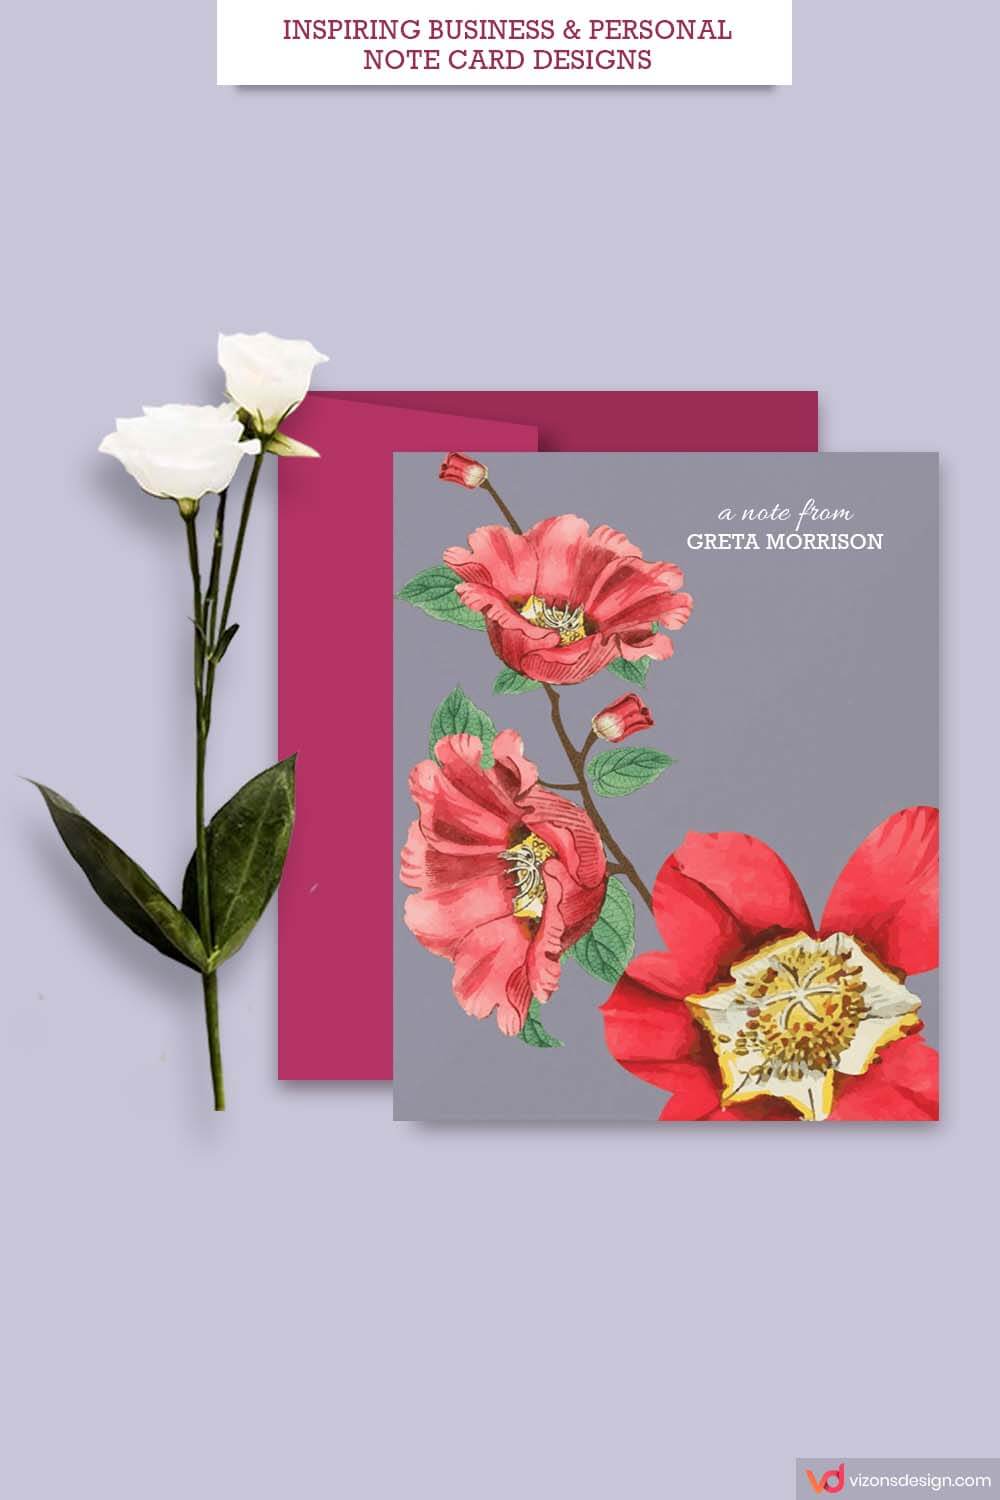 Inspiring Business & Personal Note Card Designs